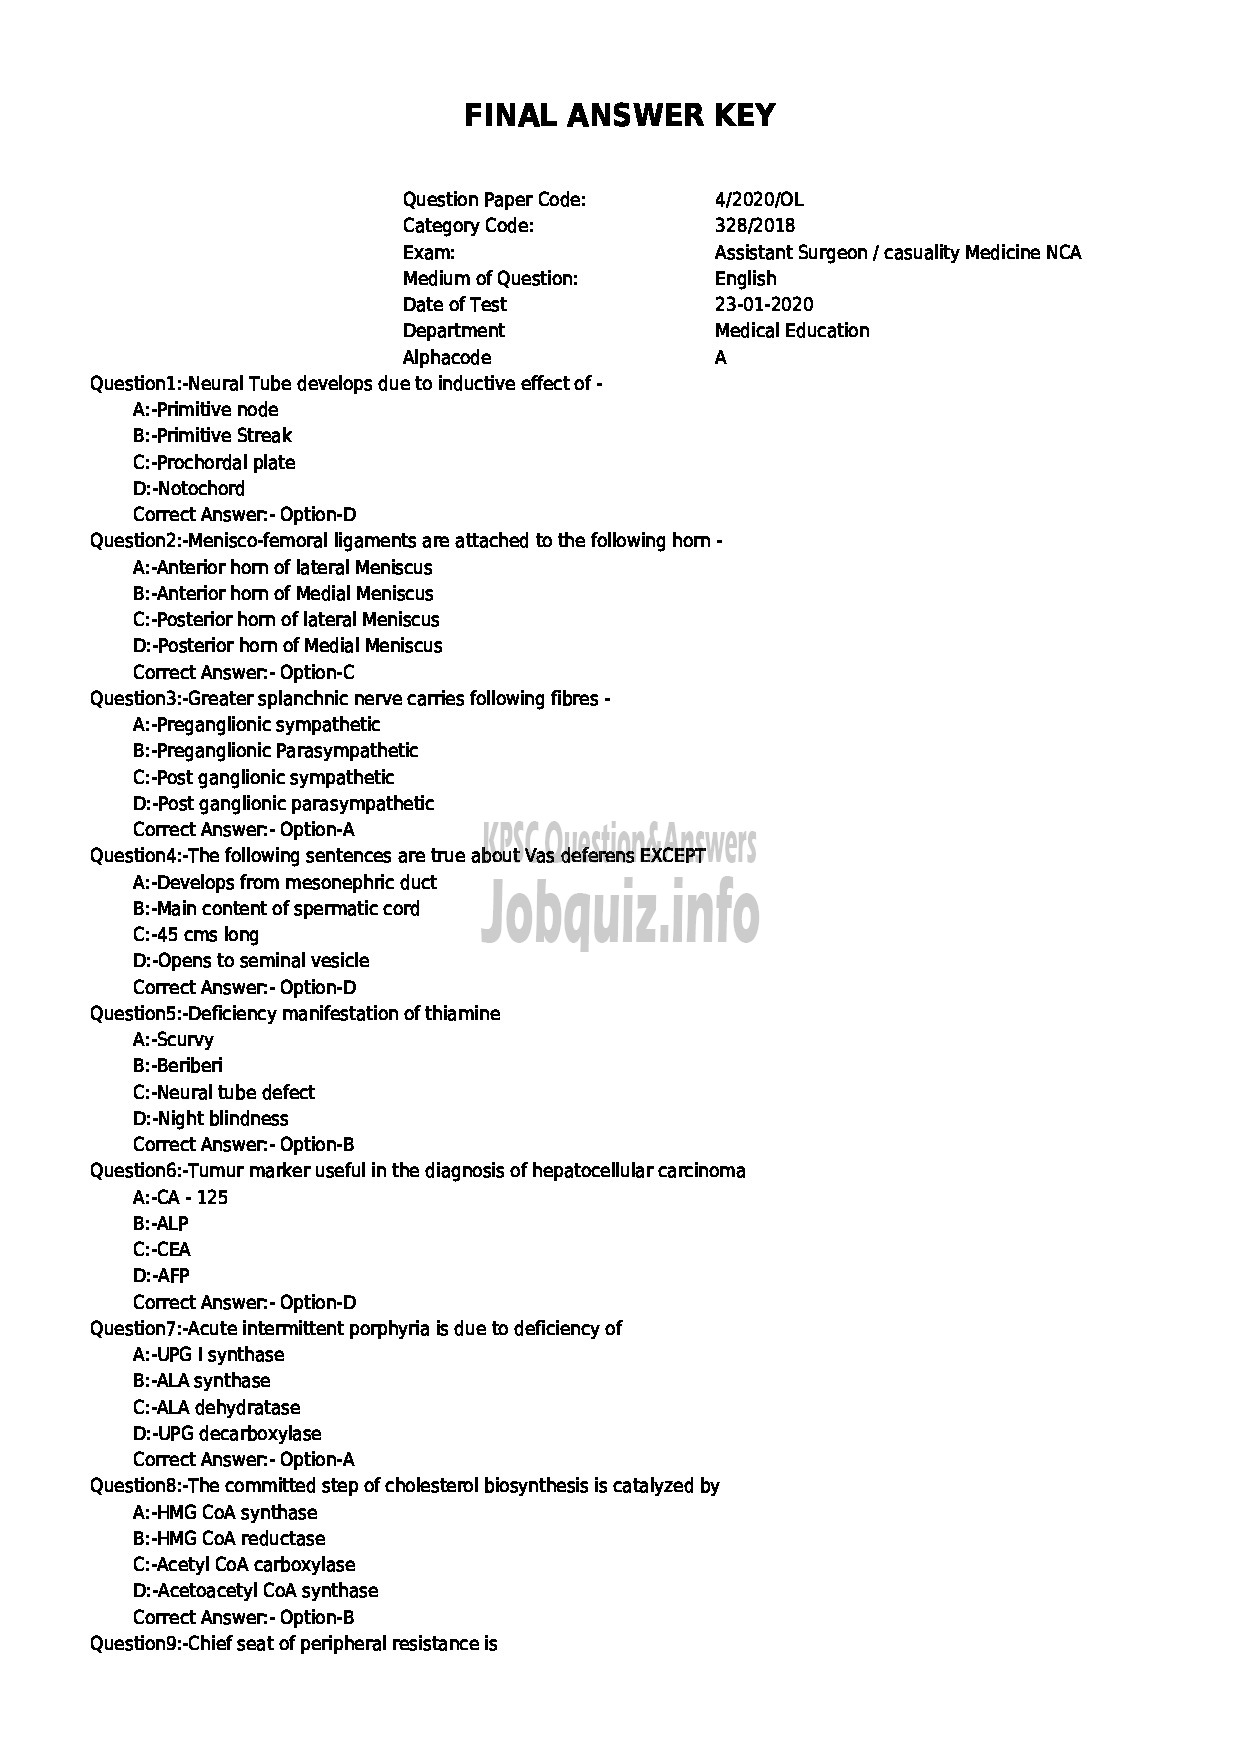 Kerala PSC Question Paper - Assistant Surgeon / casuality Medicine NCA Medical Education-1